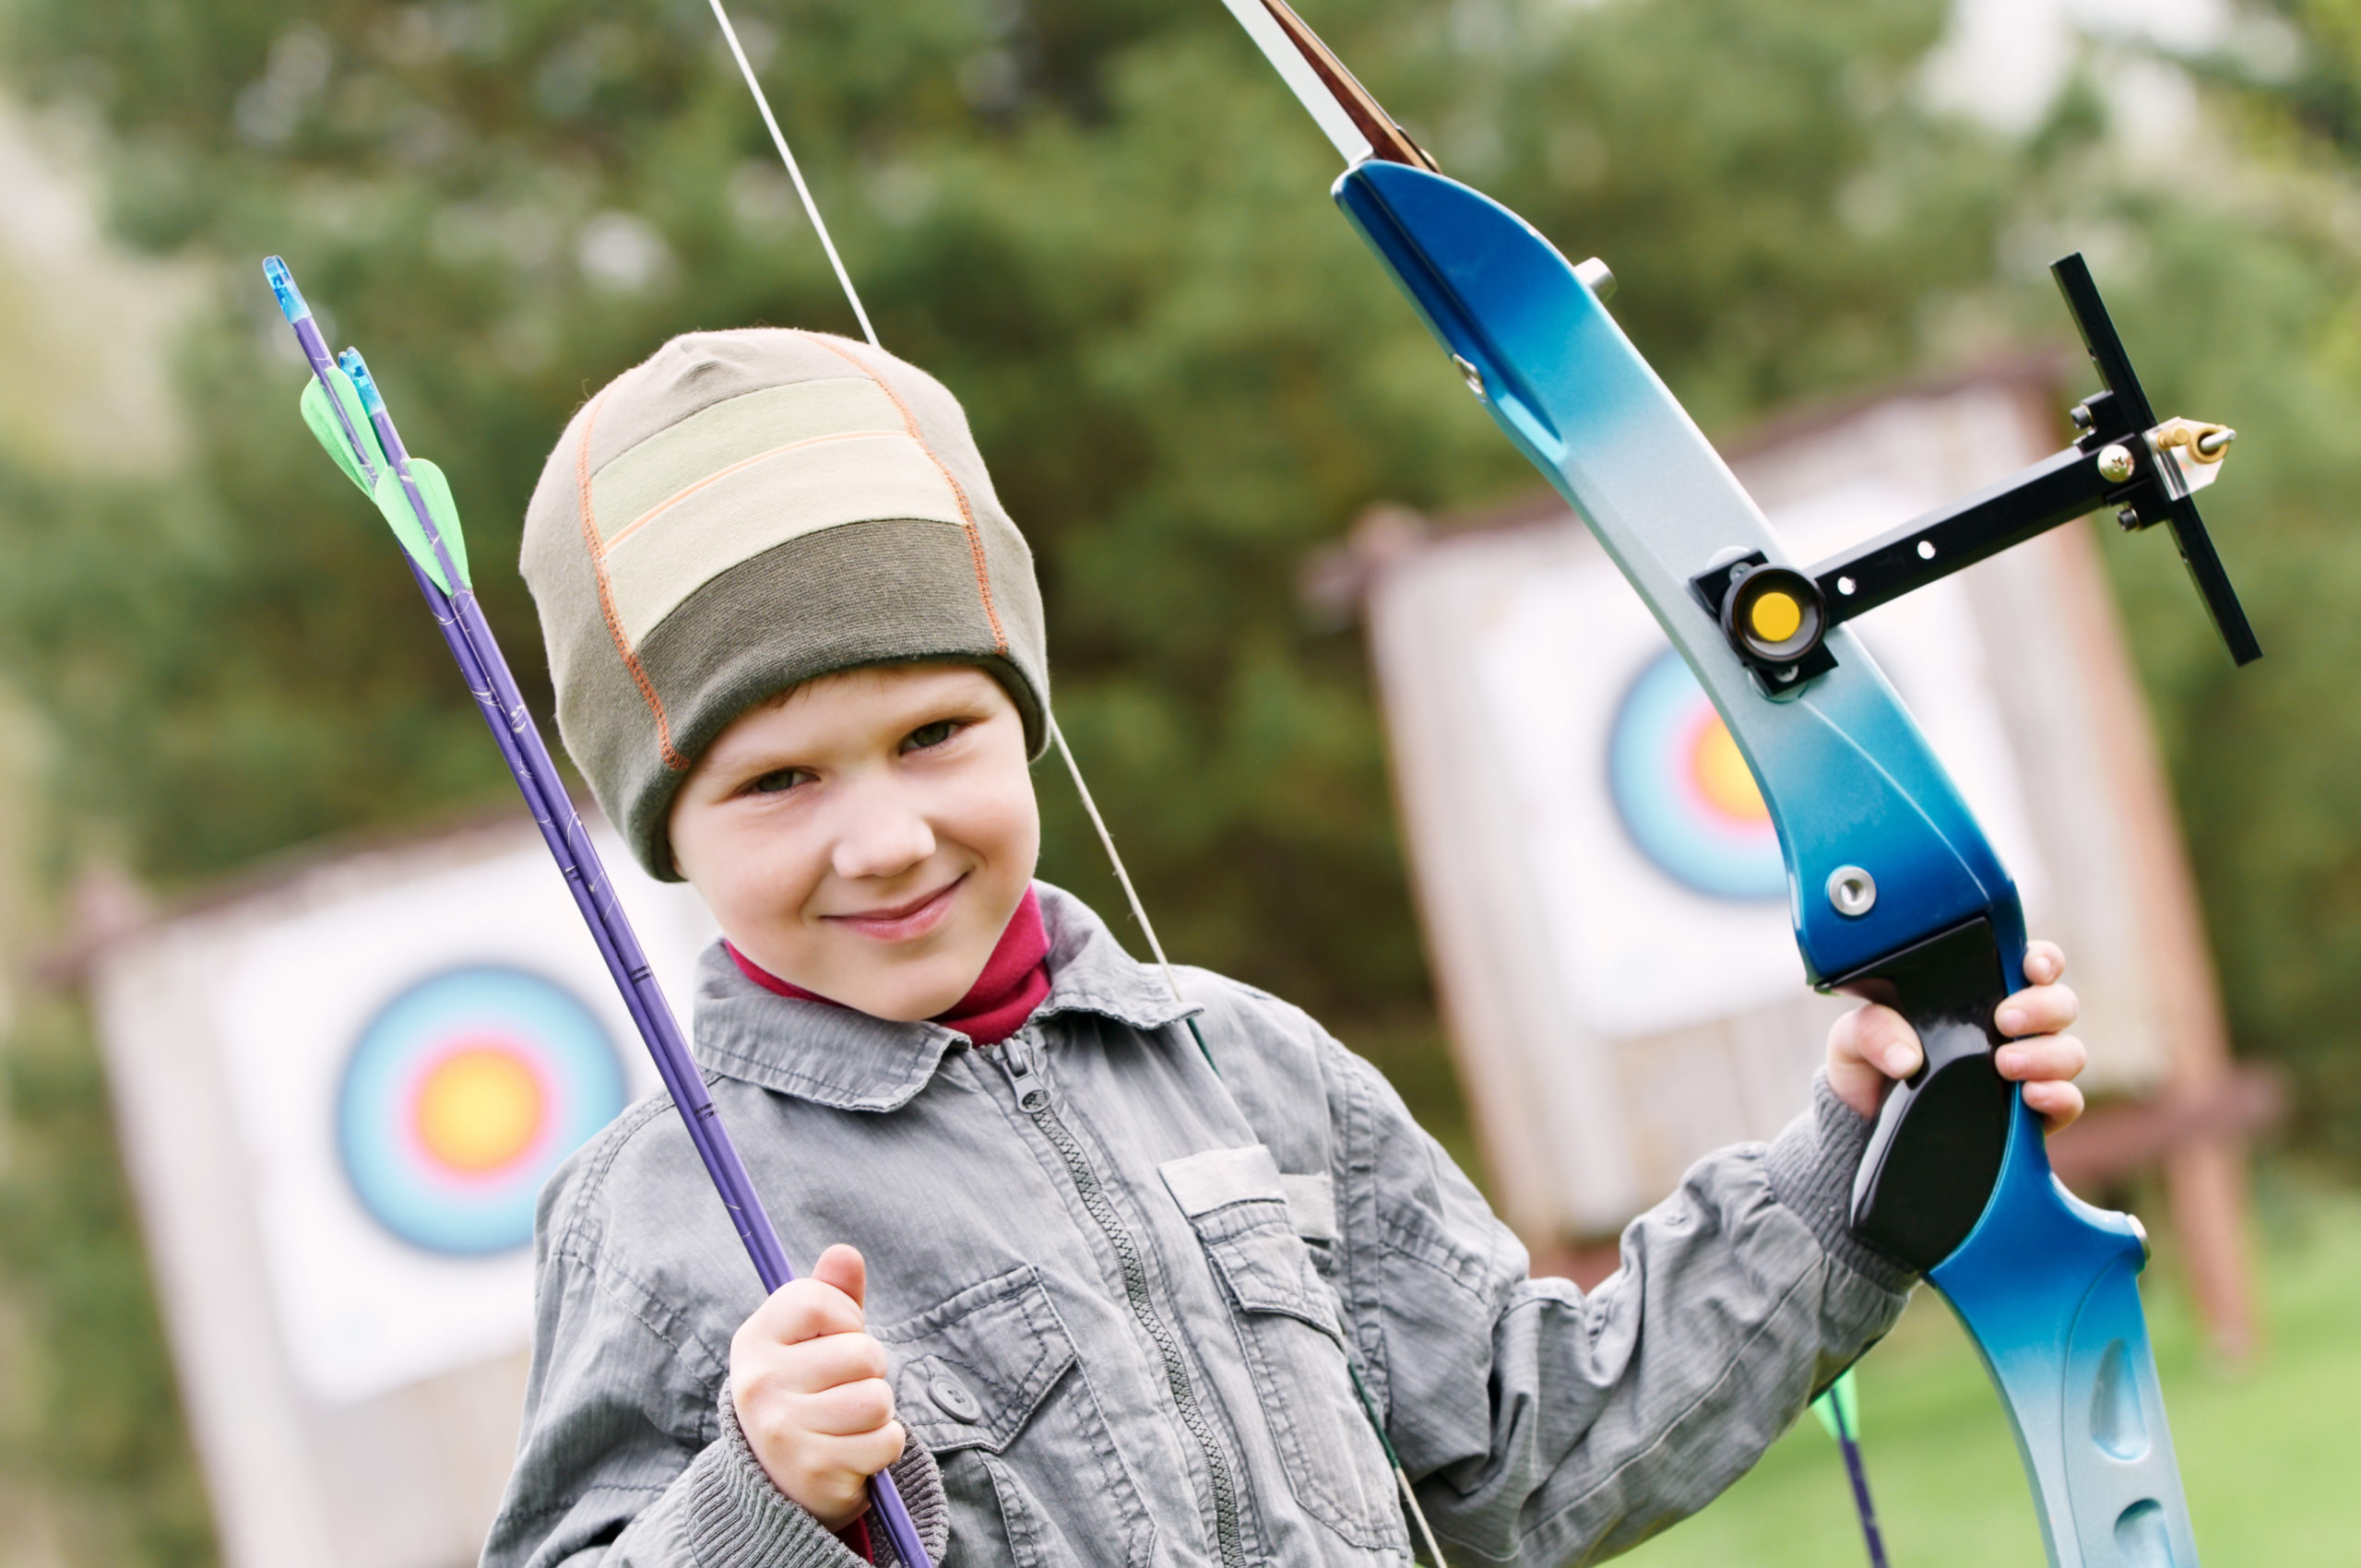 Smiling child archer with bow and arrows in front of target spring outdoors